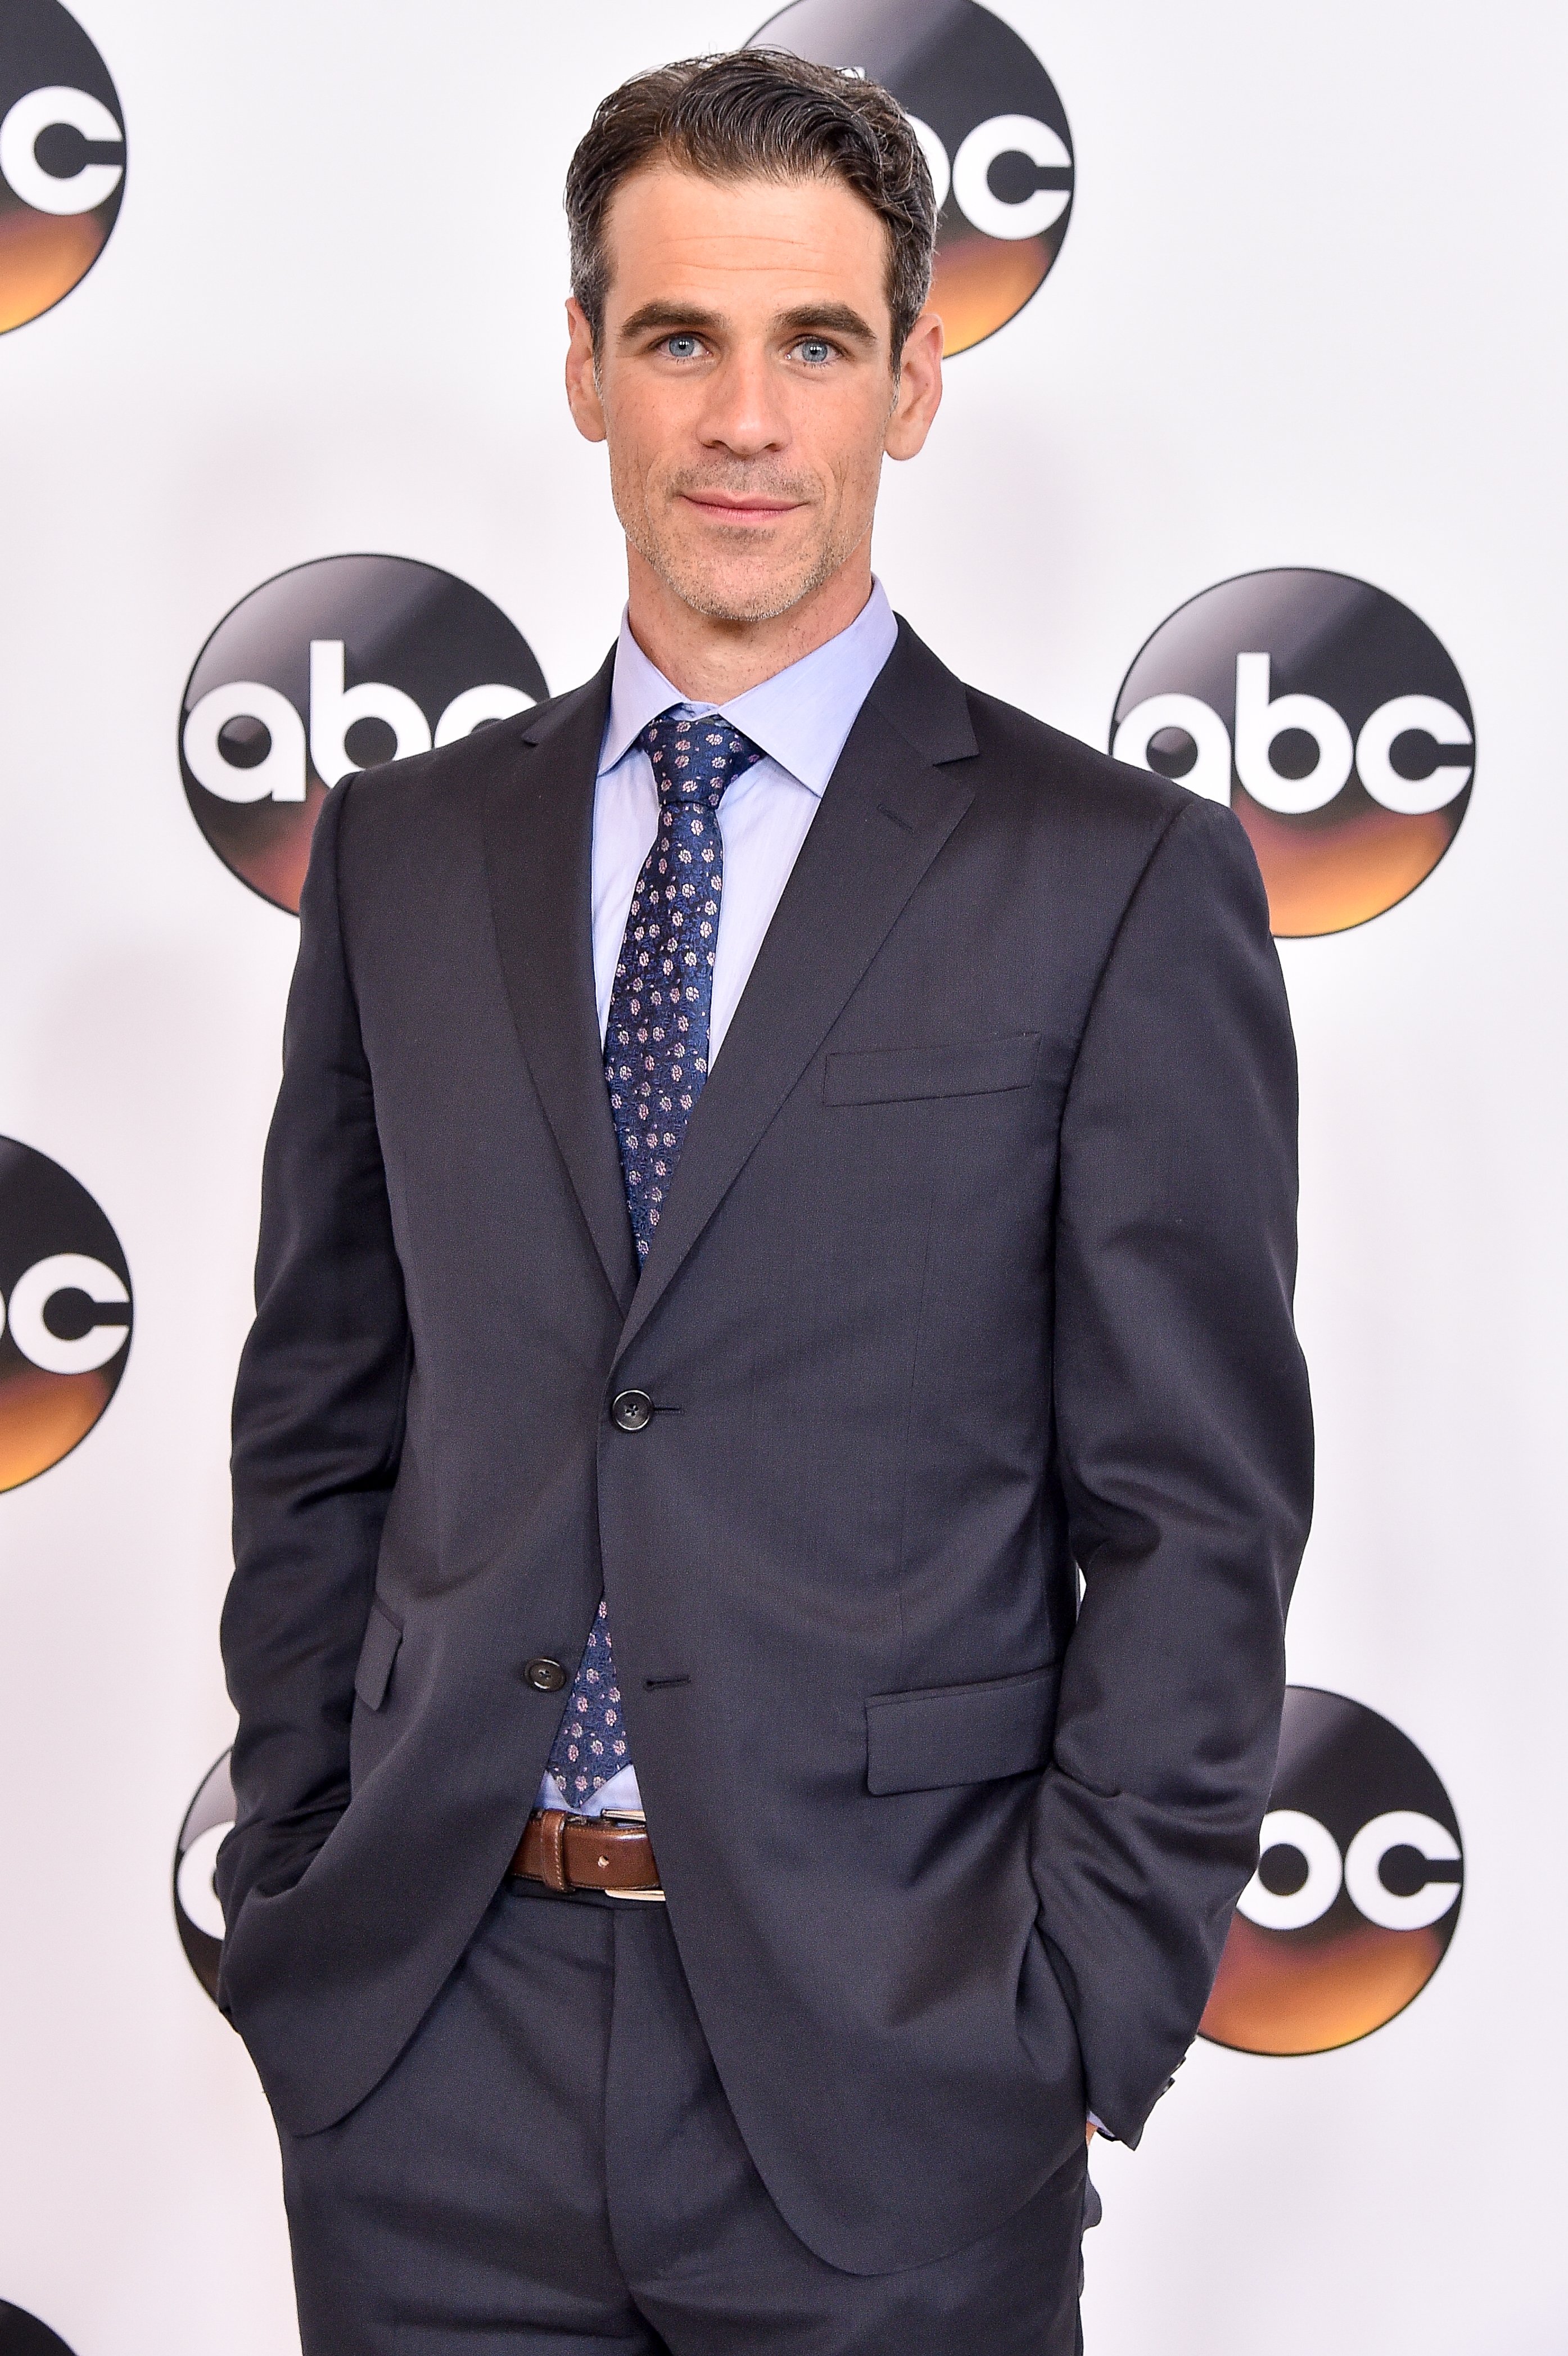 Eddie Cahill attends the Disney ABC Television Group TCA Summer Press Tour in Beverly Hills on August 4, 2016 | Photo: Getty Images